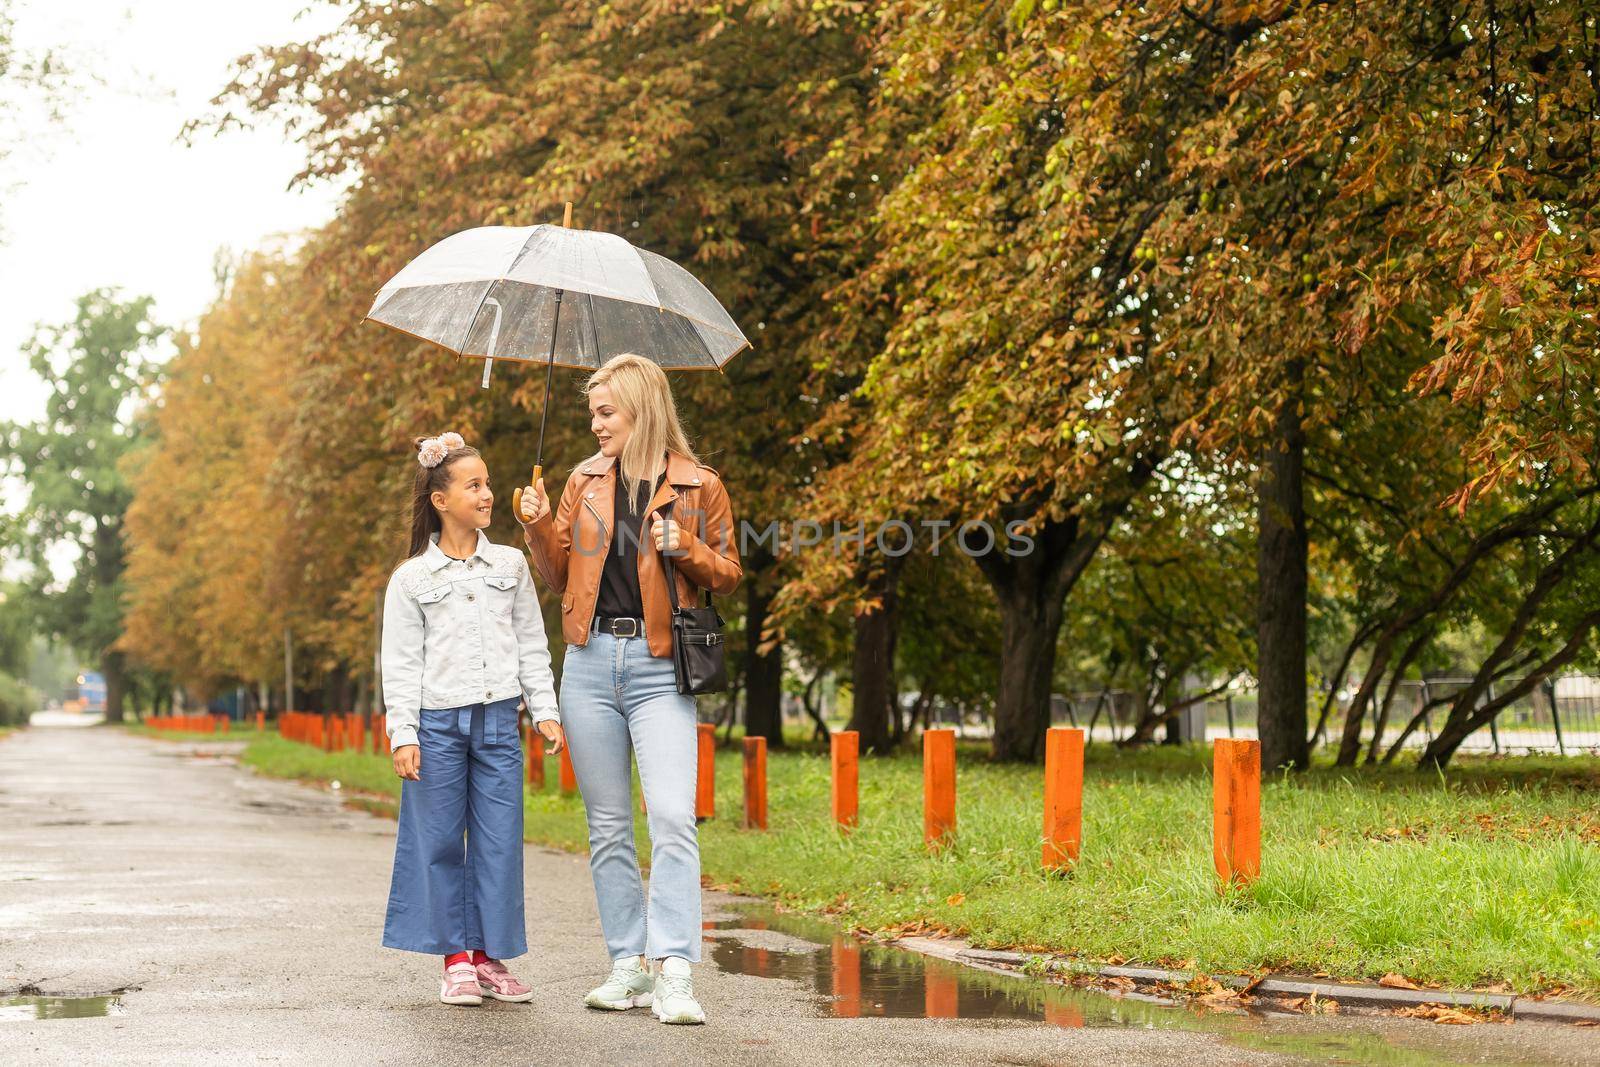 Mom holds a transparent umbrella from which fall autumn leaves. Daughter and mother laugh. Happy mom and little daughter having fun in autumn park